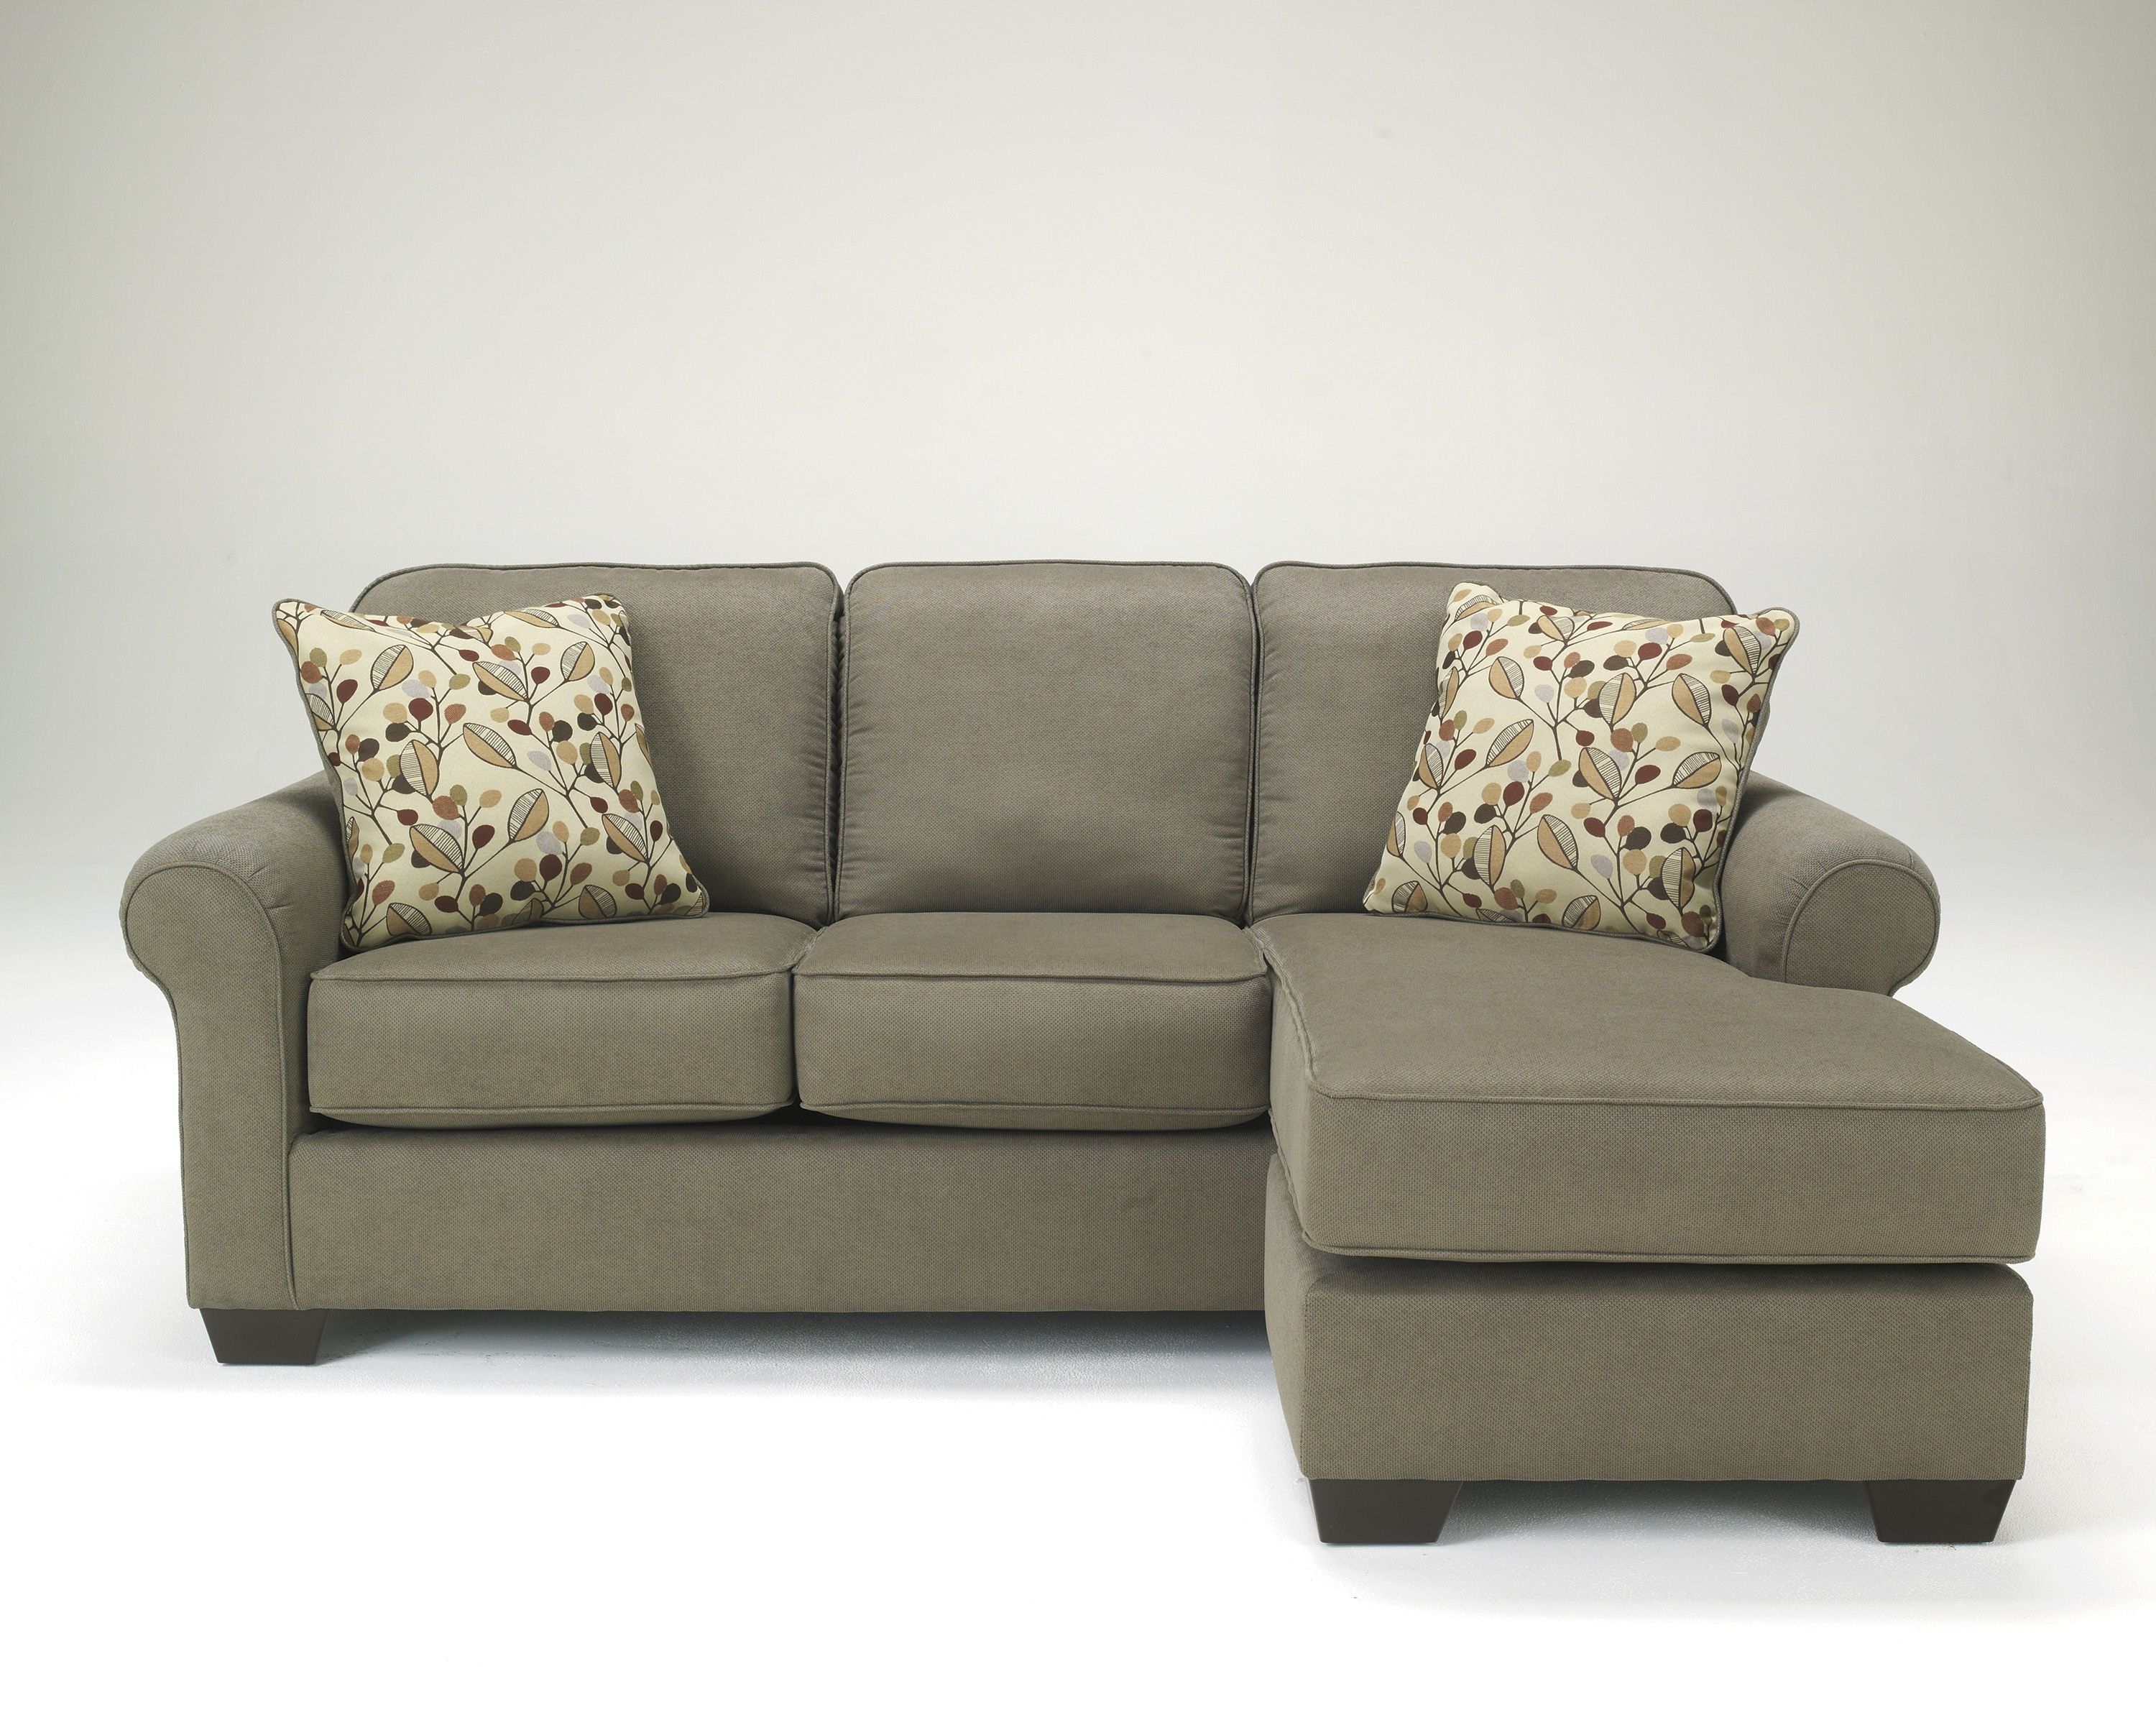 Chaise Lounge Sofa Ashley Furniture – Furniture Designs Throughout Popular Ashley Furniture Chaise Lounges (View 15 of 15)